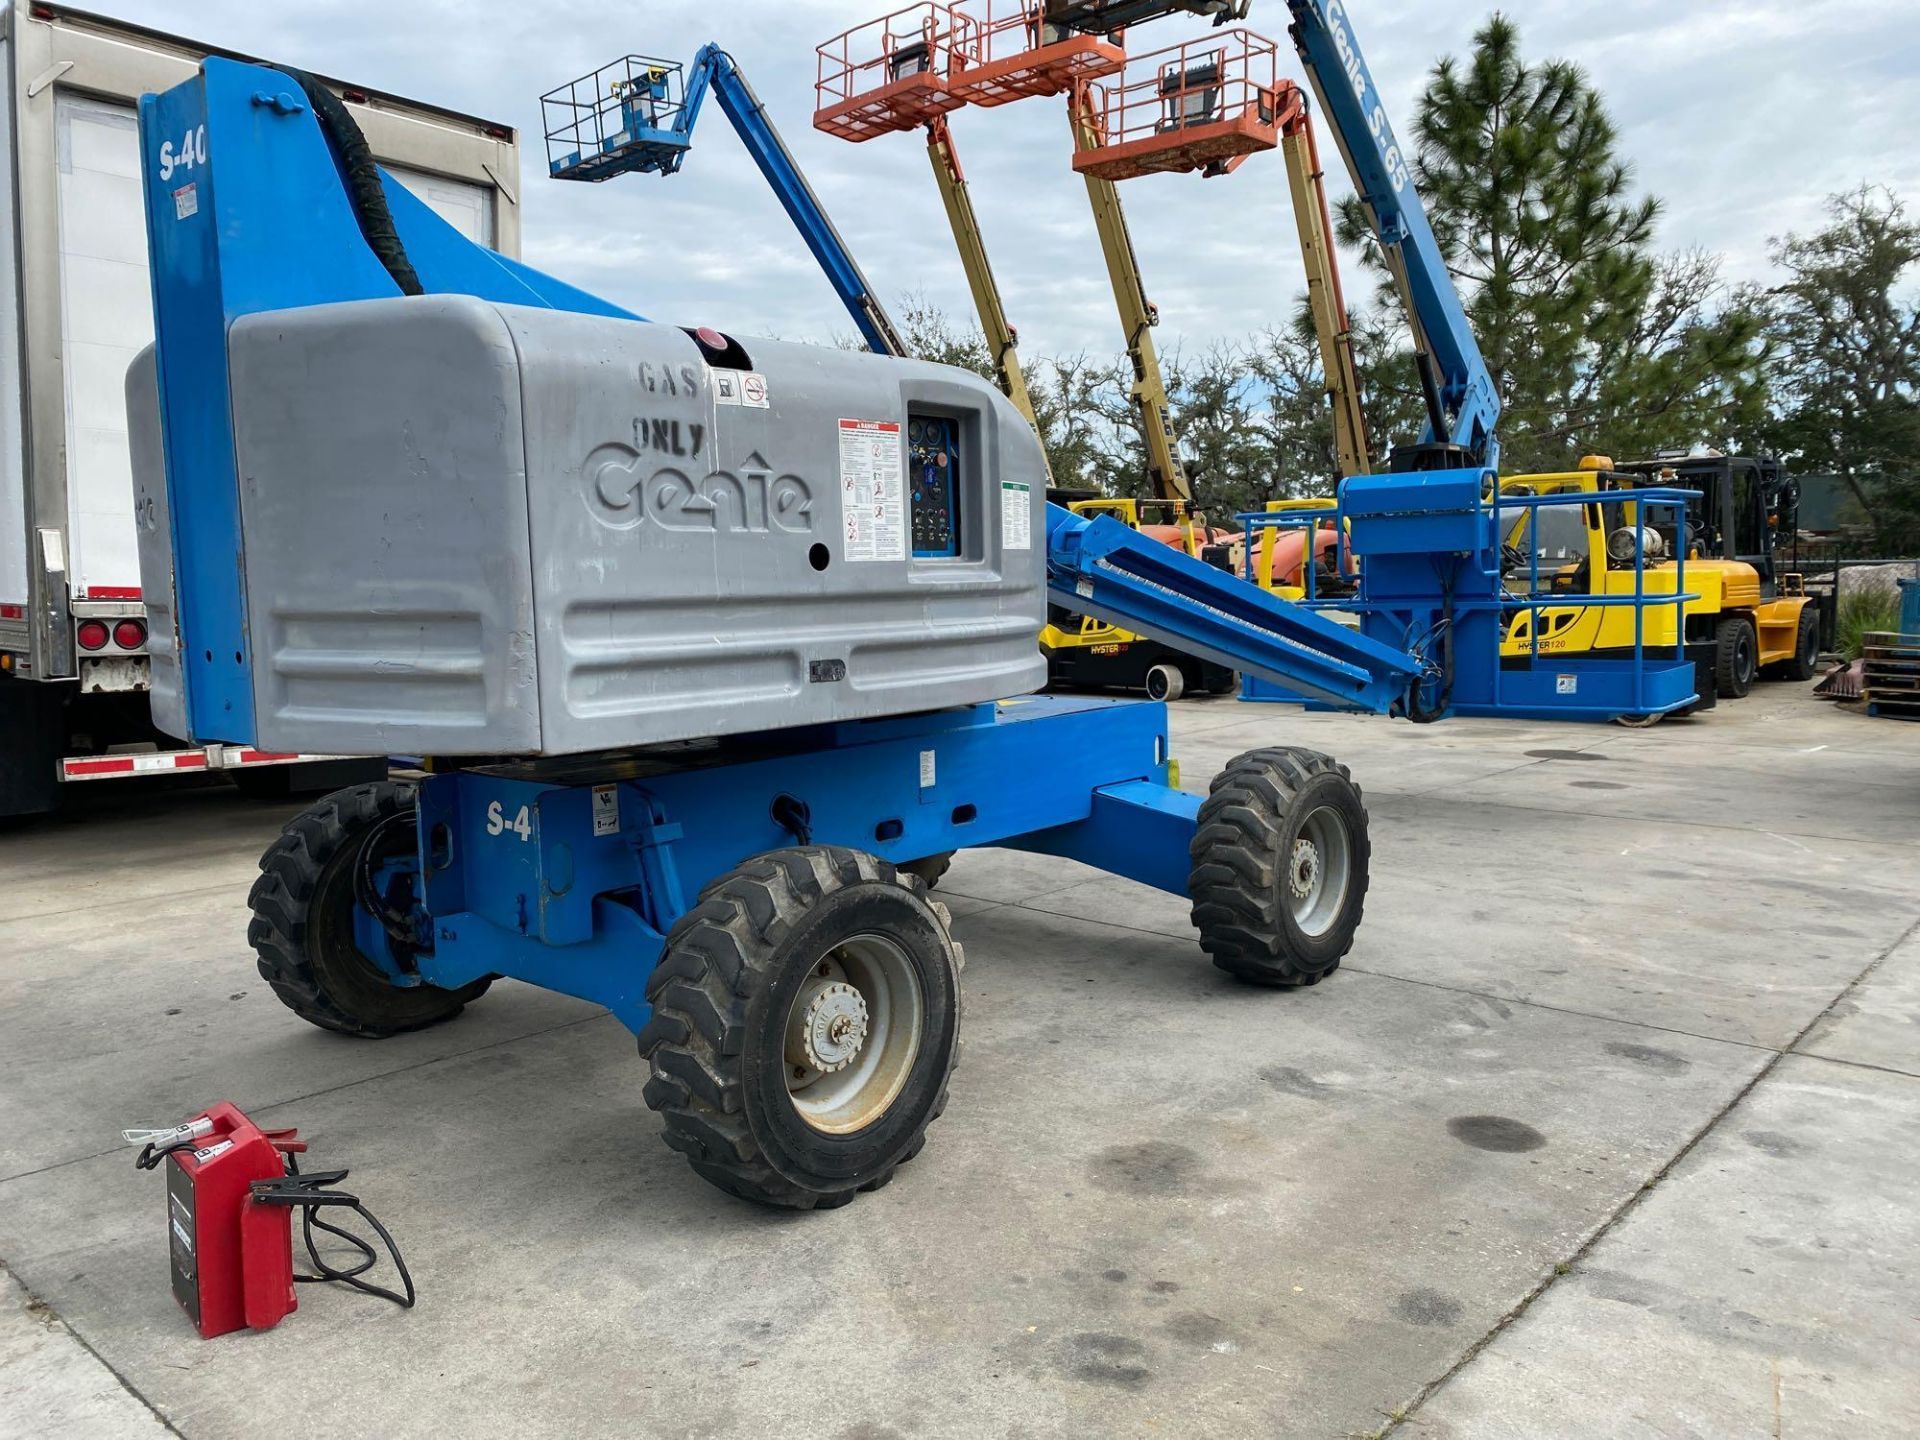 GENIE S-40 MAN LIFT, 4x4, 40’ PLATFORM HEIGHT, GAS POWERED, RUNS AND OPERATES - Image 2 of 9